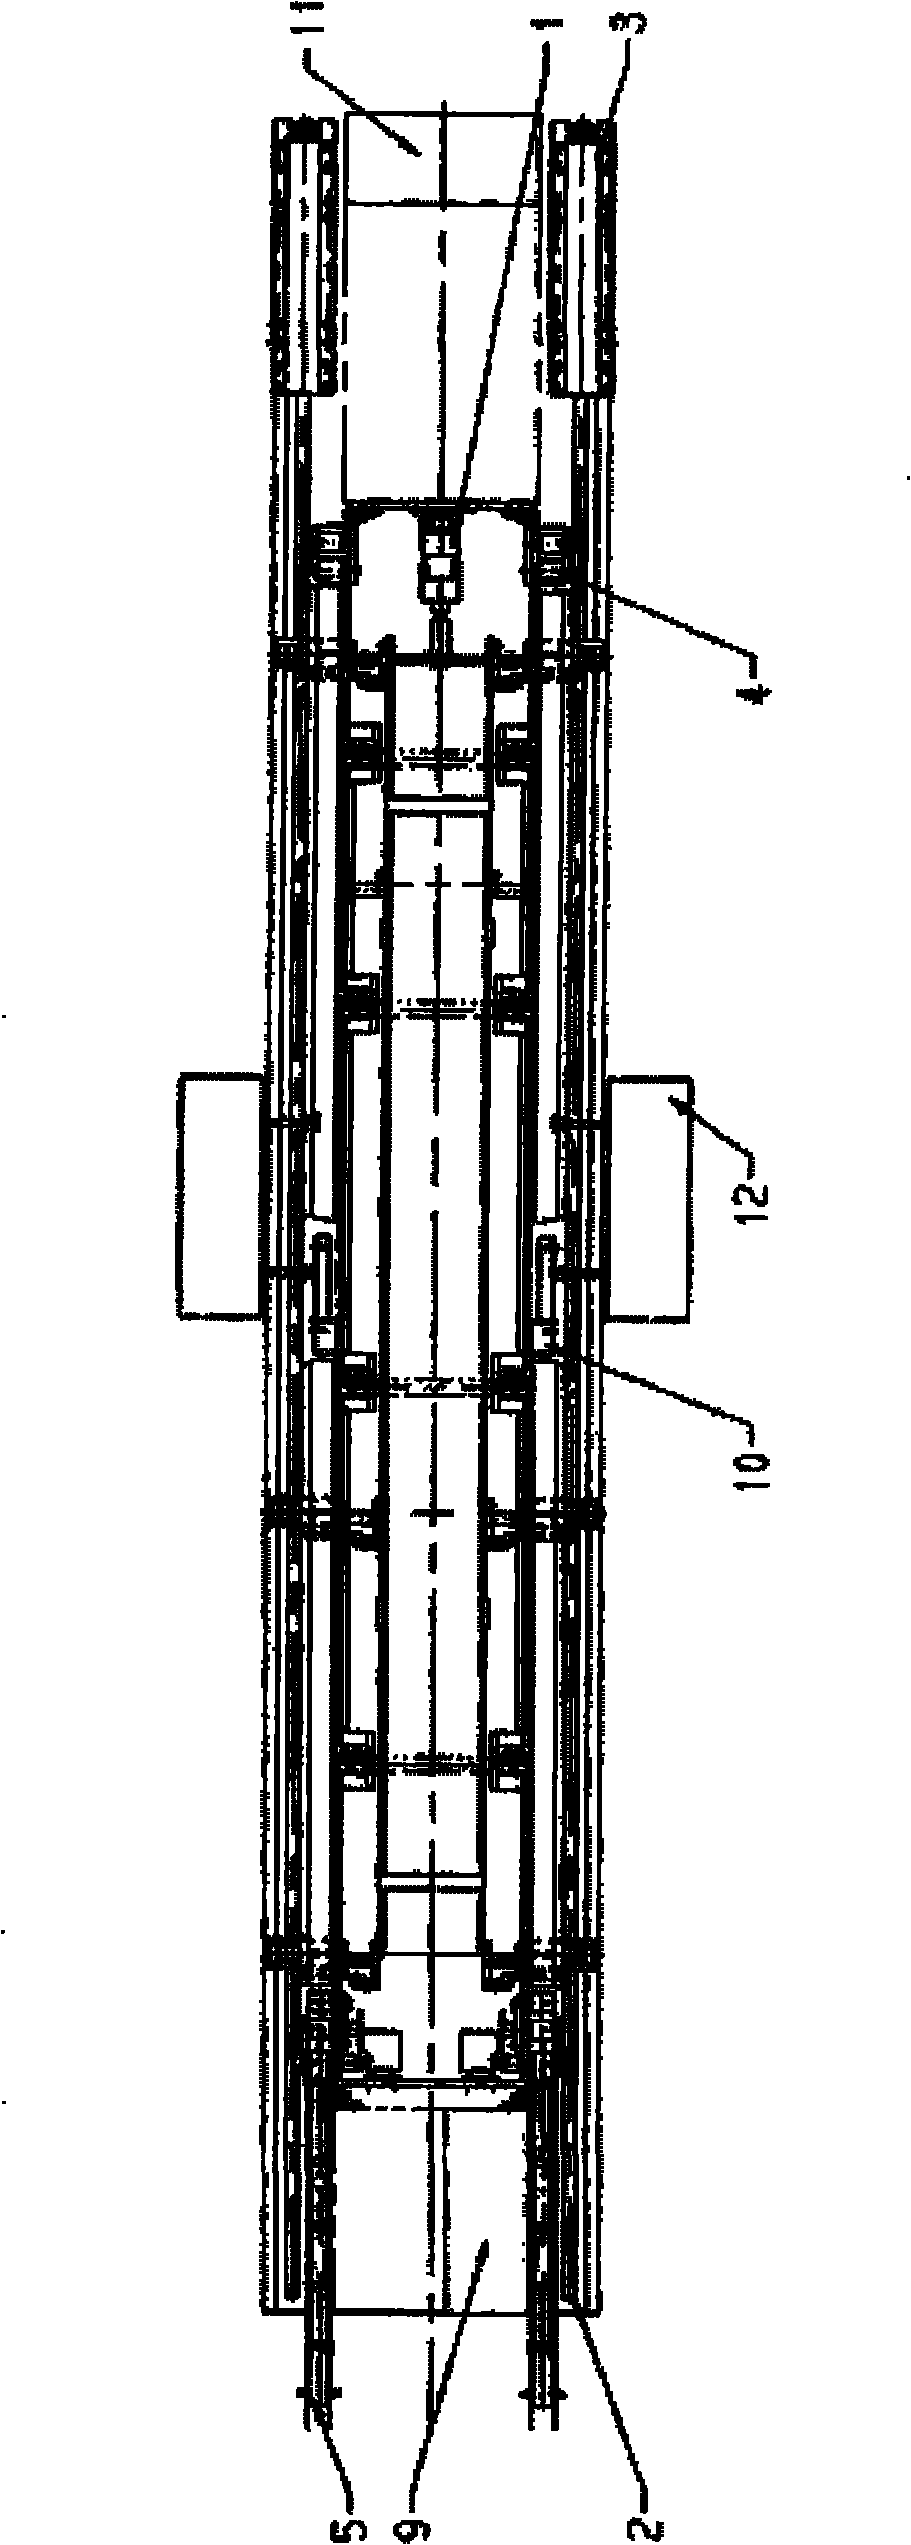 Collective doffing device of ring yarn spinning frame